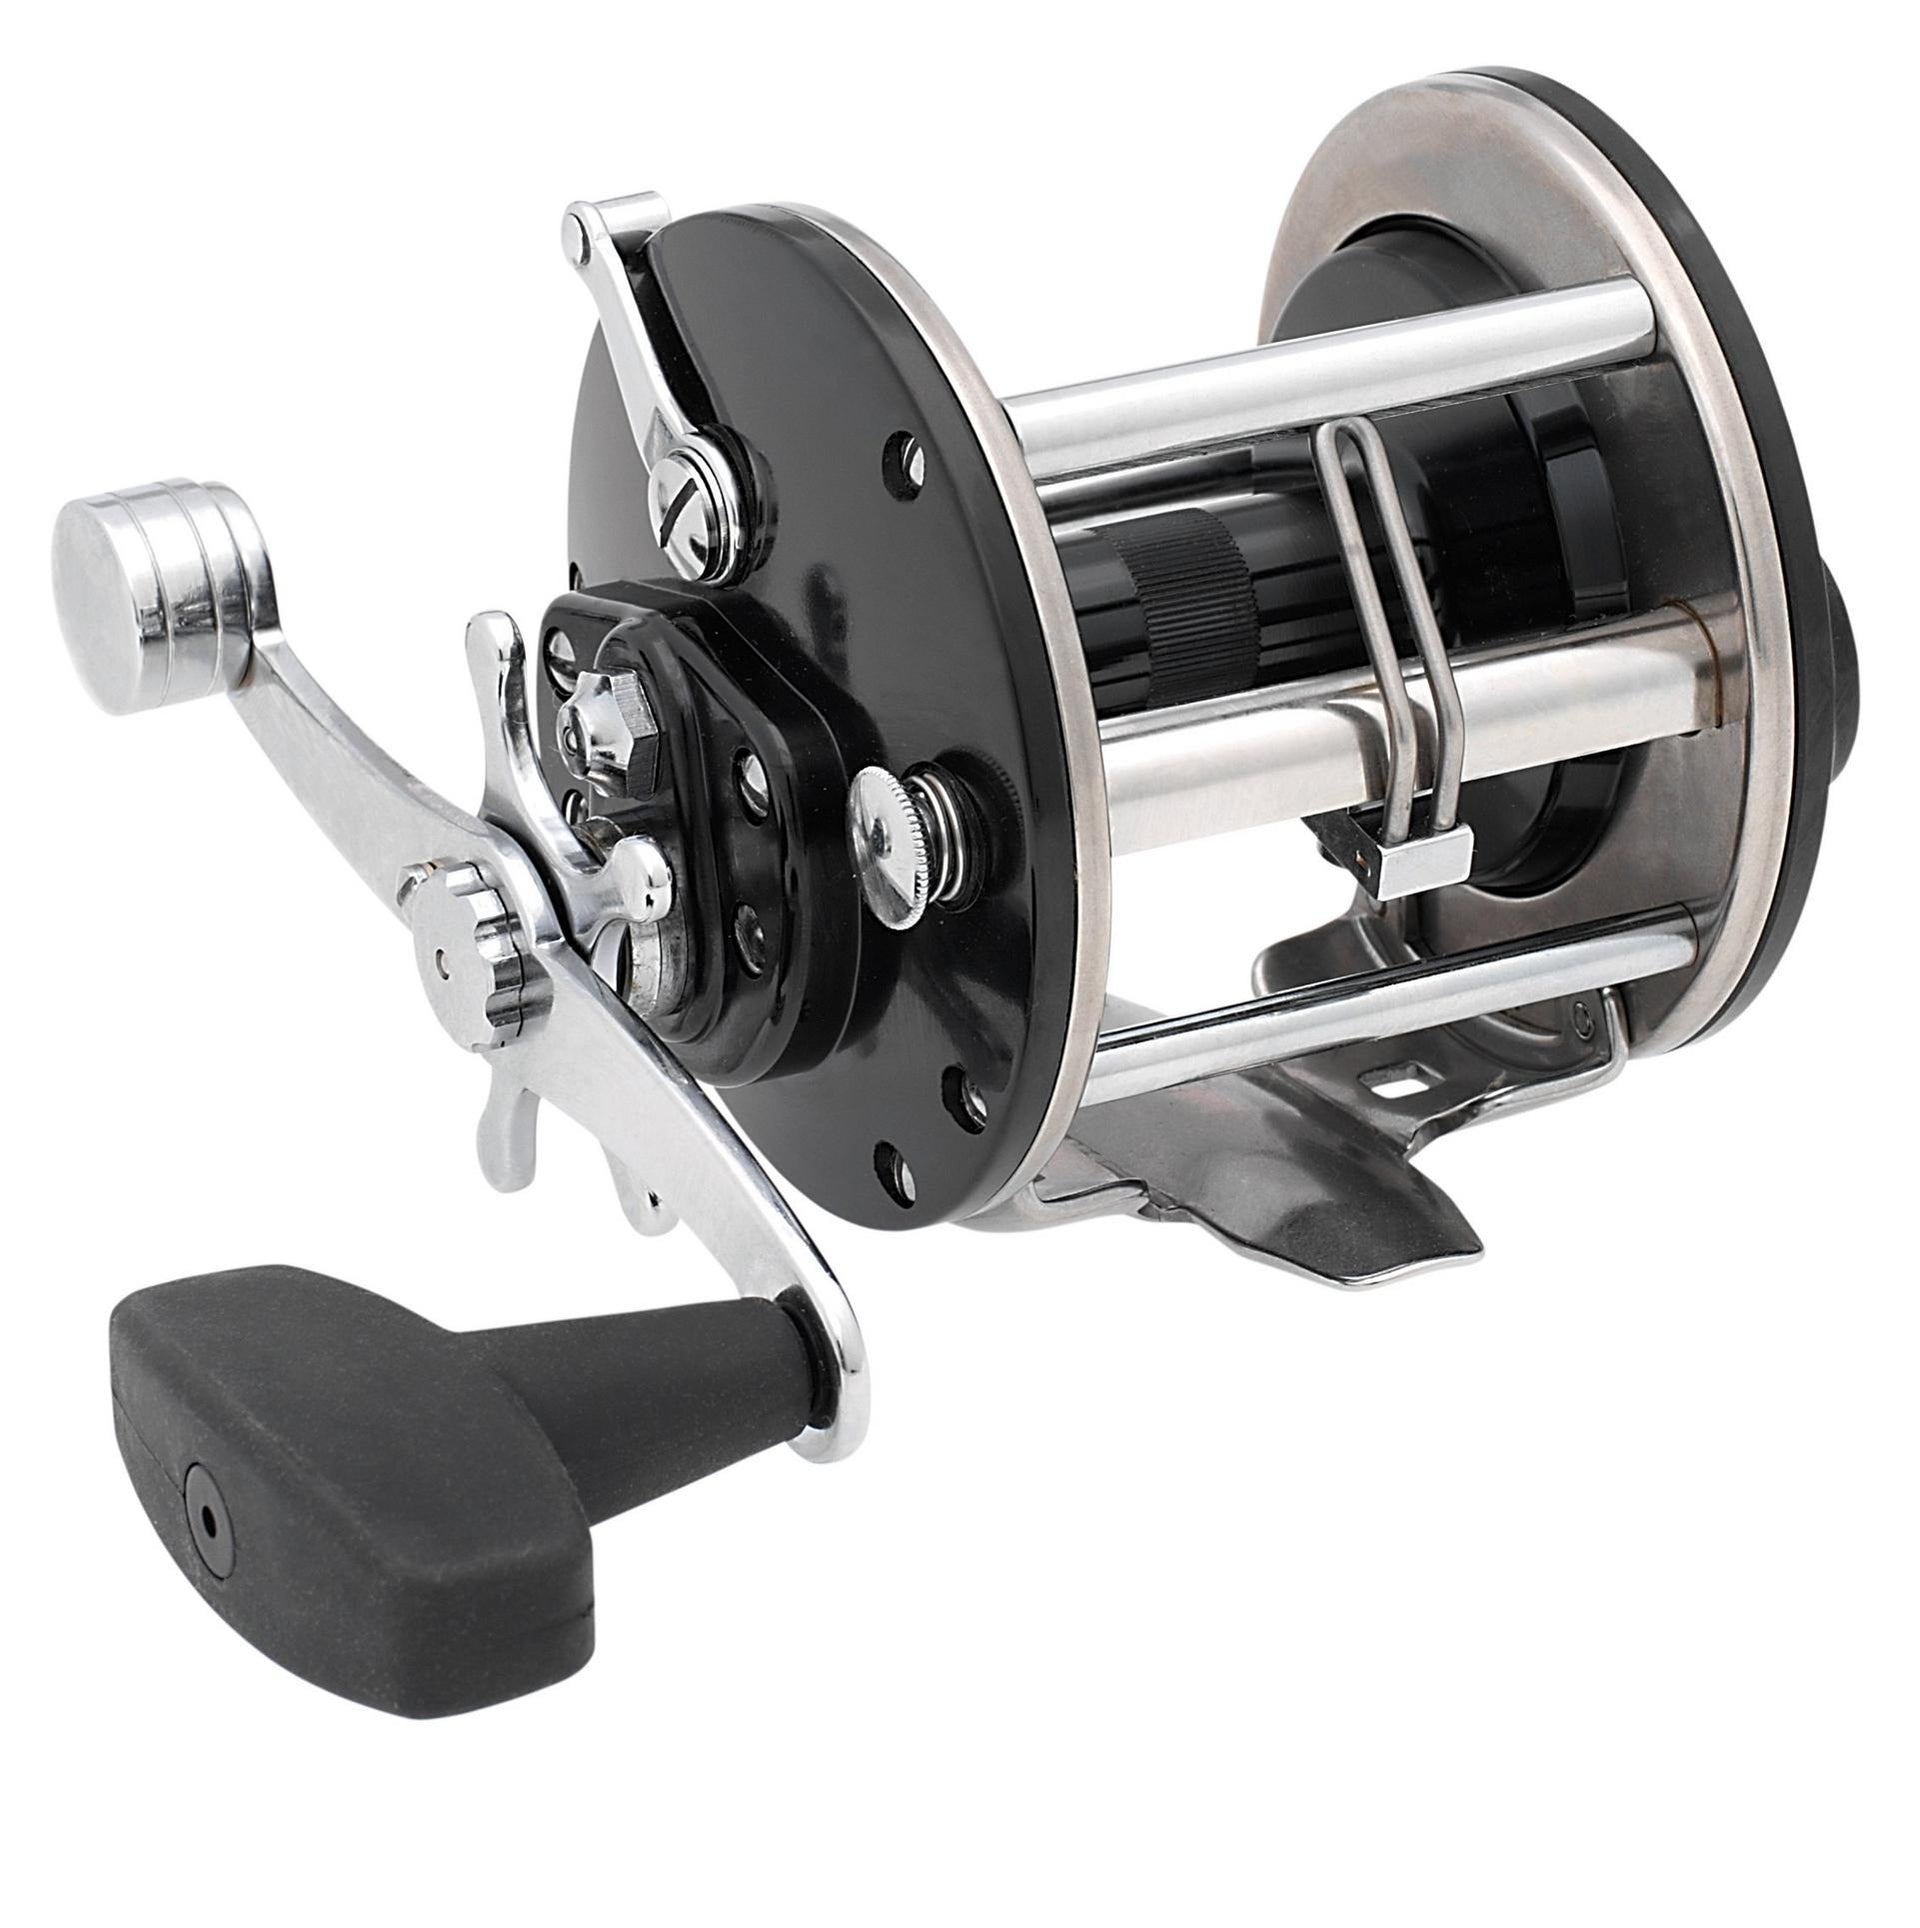 Penn No. 209 Level Wind Saltwater Conventional Fishing Reel made in USA -  La Paz County Sheriff's Office Dedicated to Service